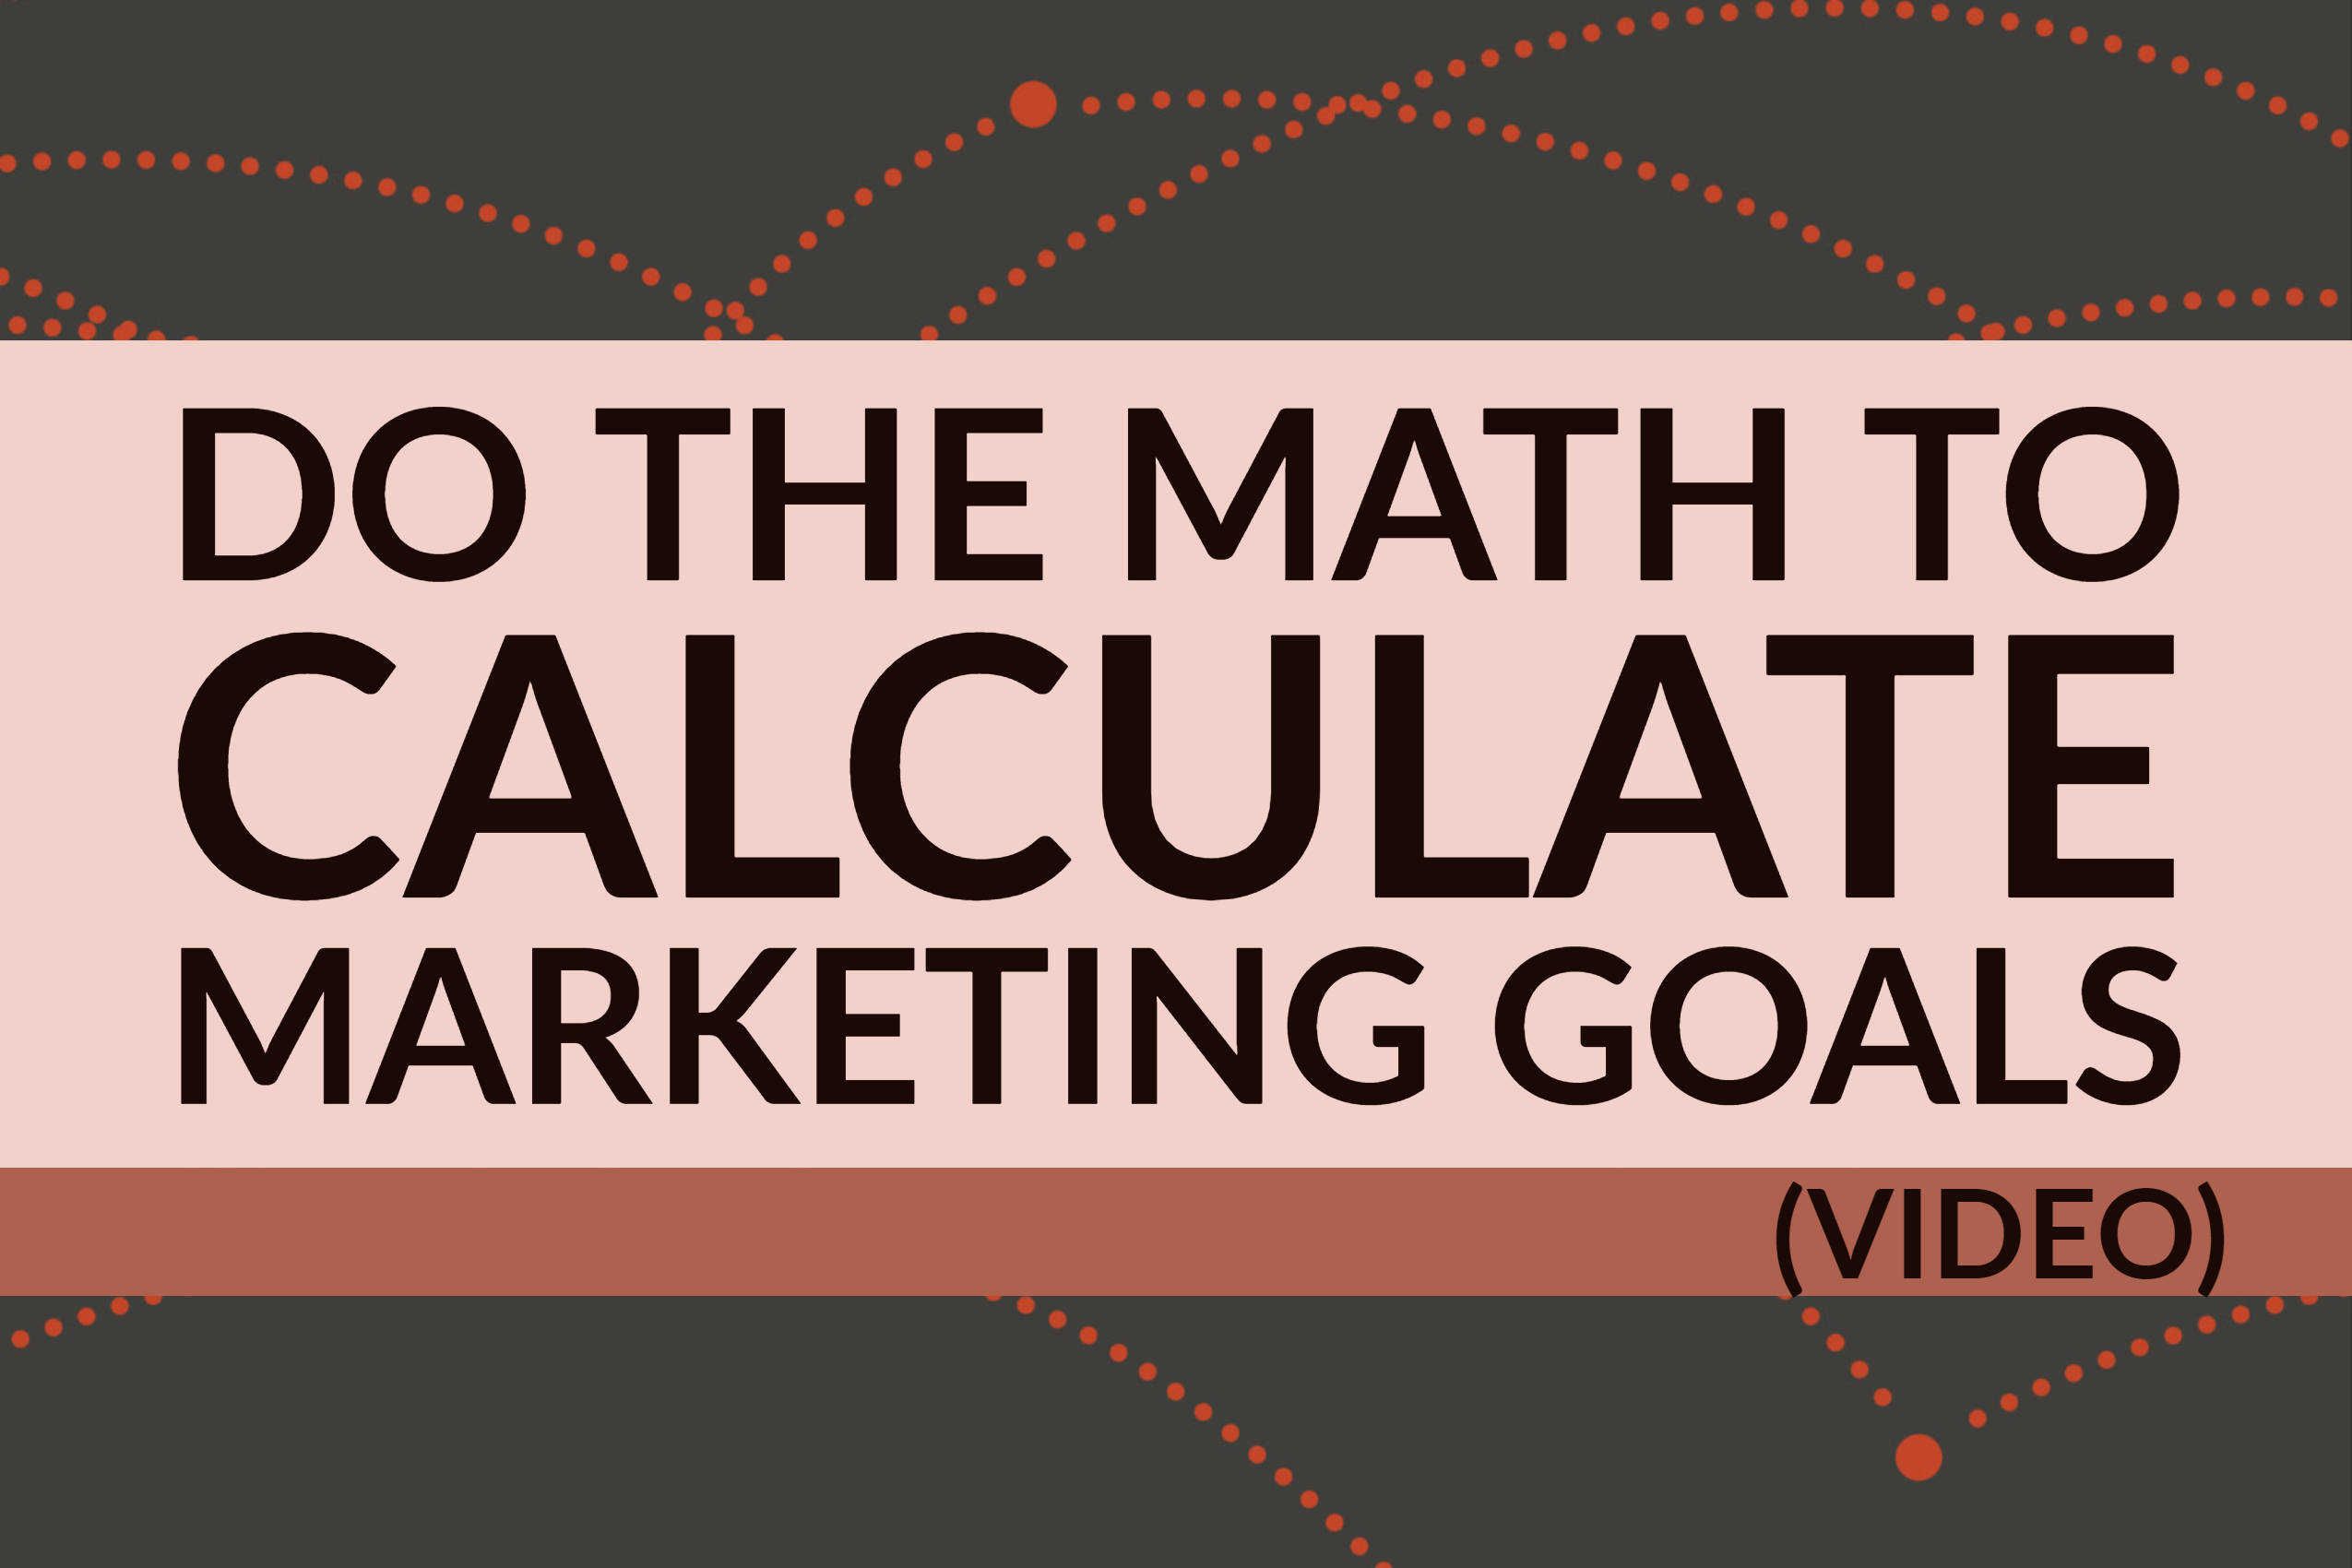 Do The Math To Calculate Marketing Goals (video)